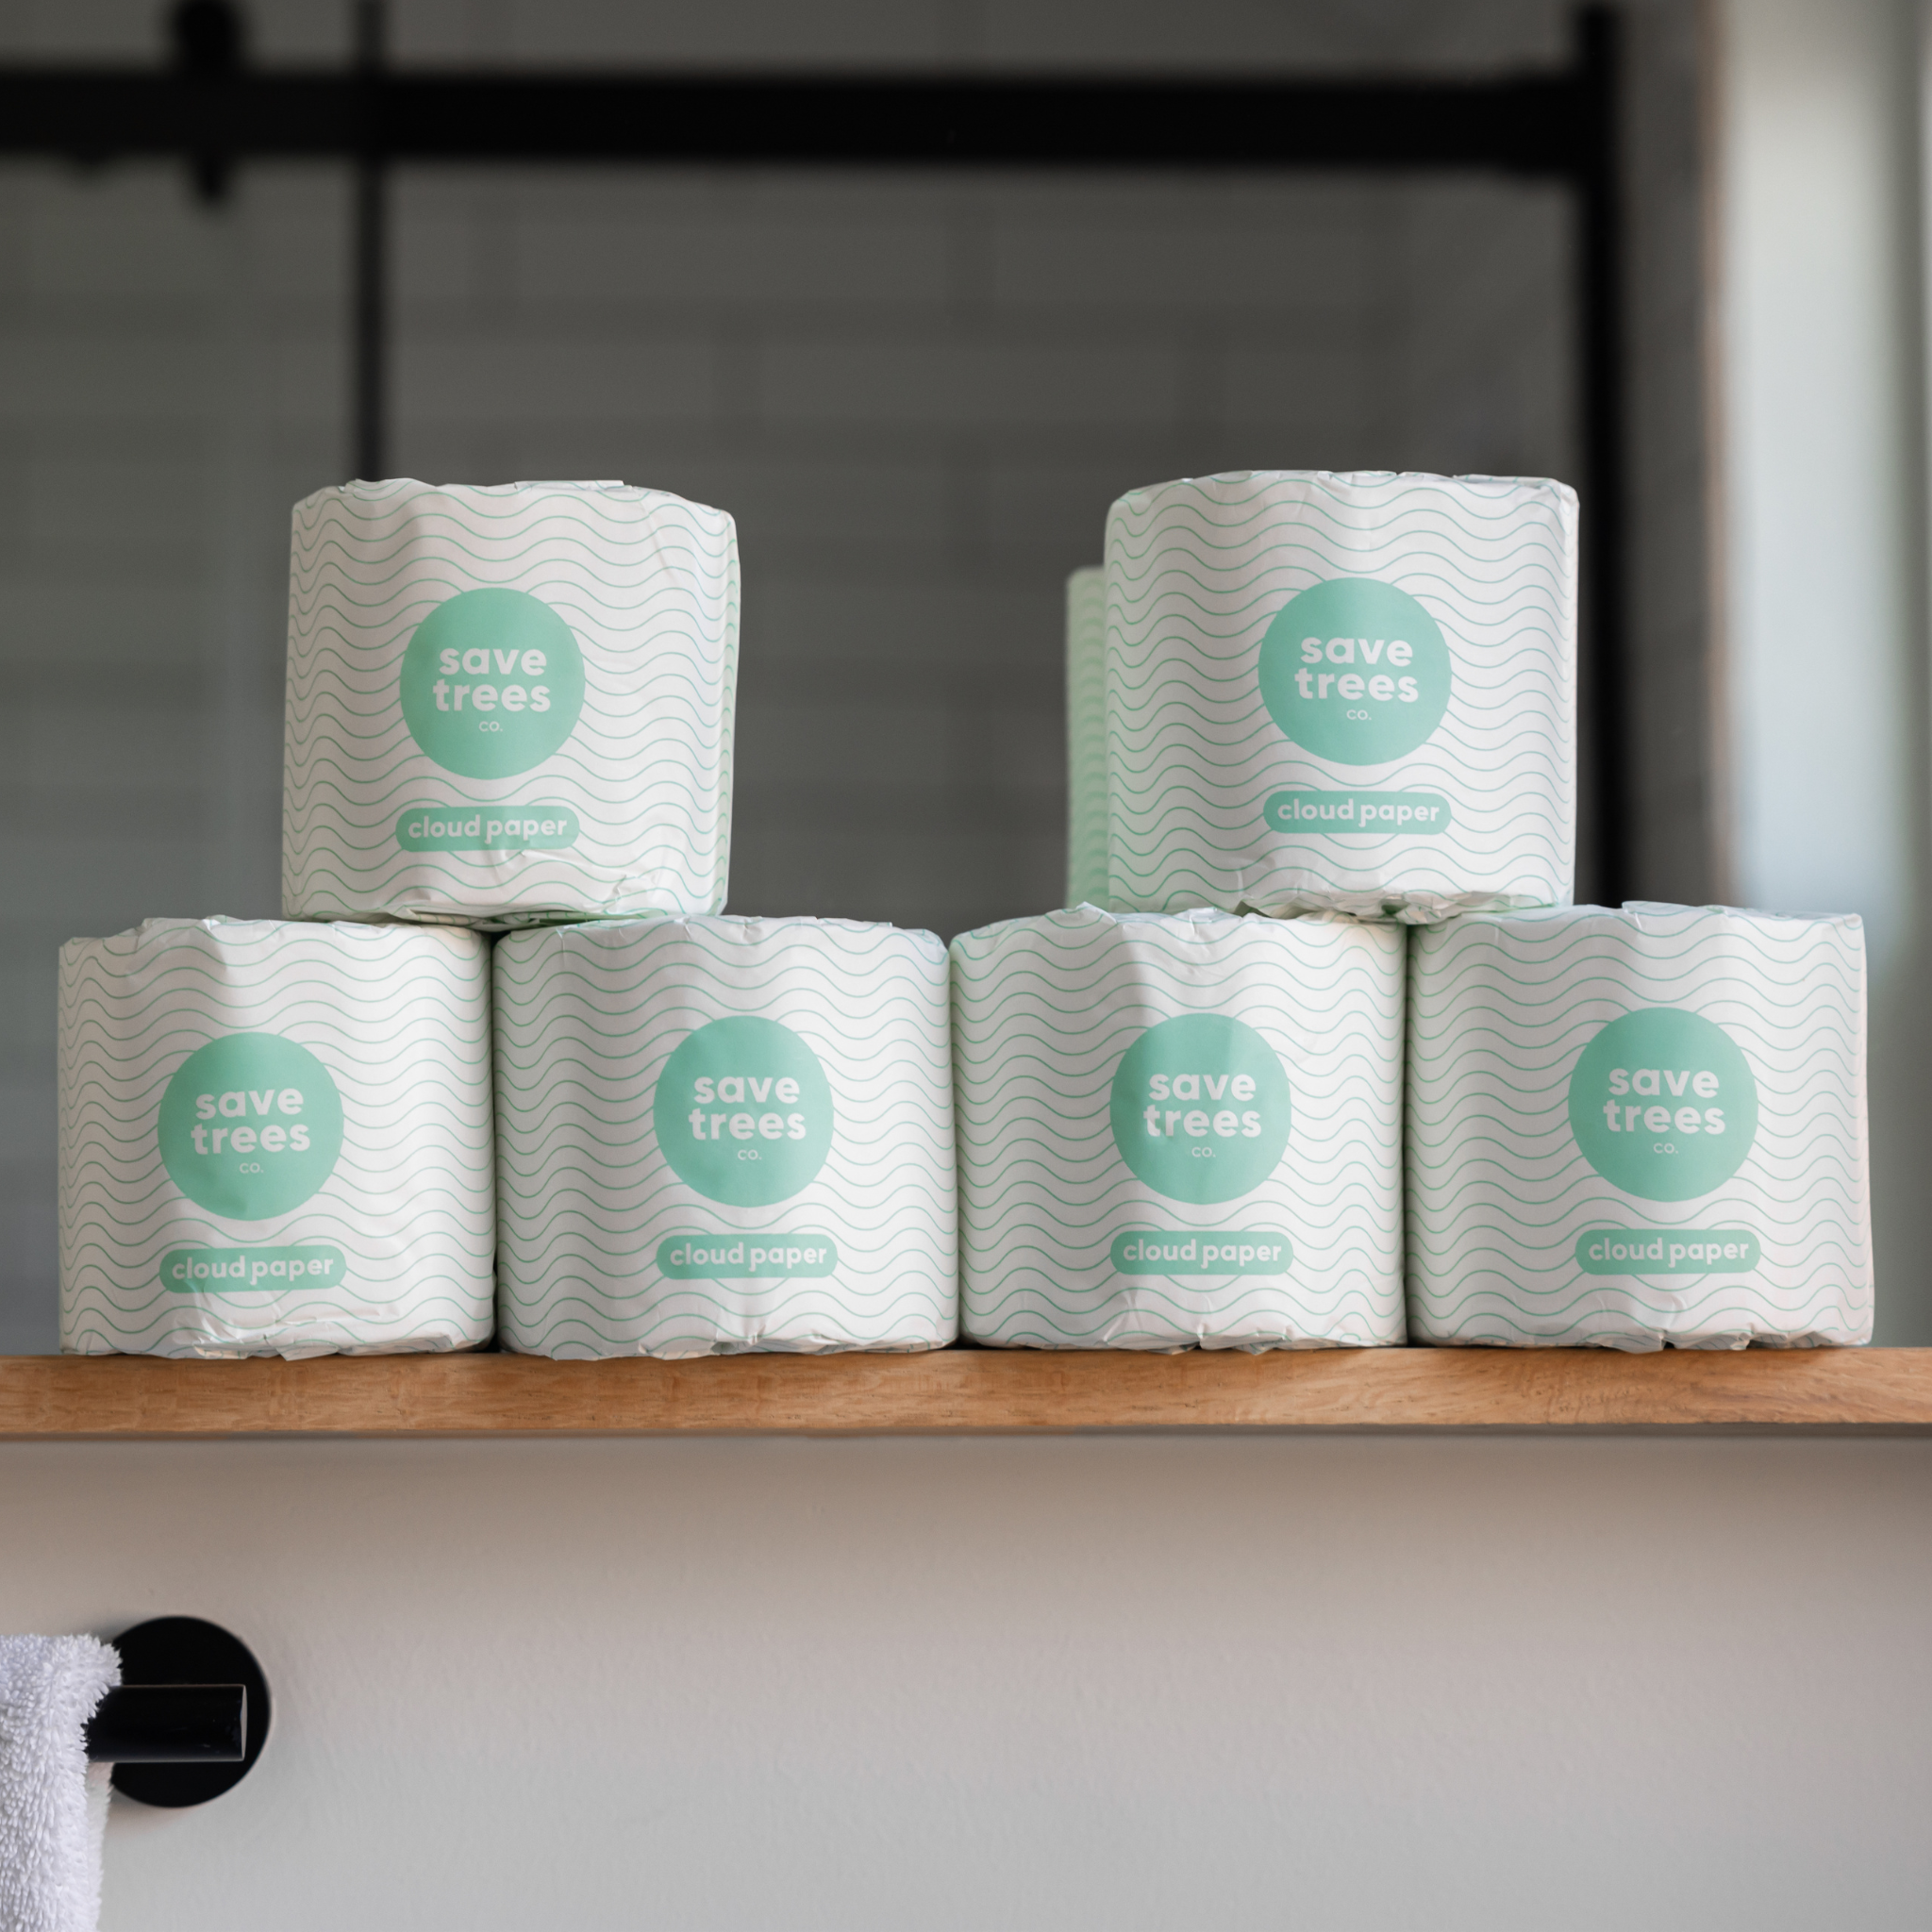 Toilet paper subscription: It changed my life. Honestly.